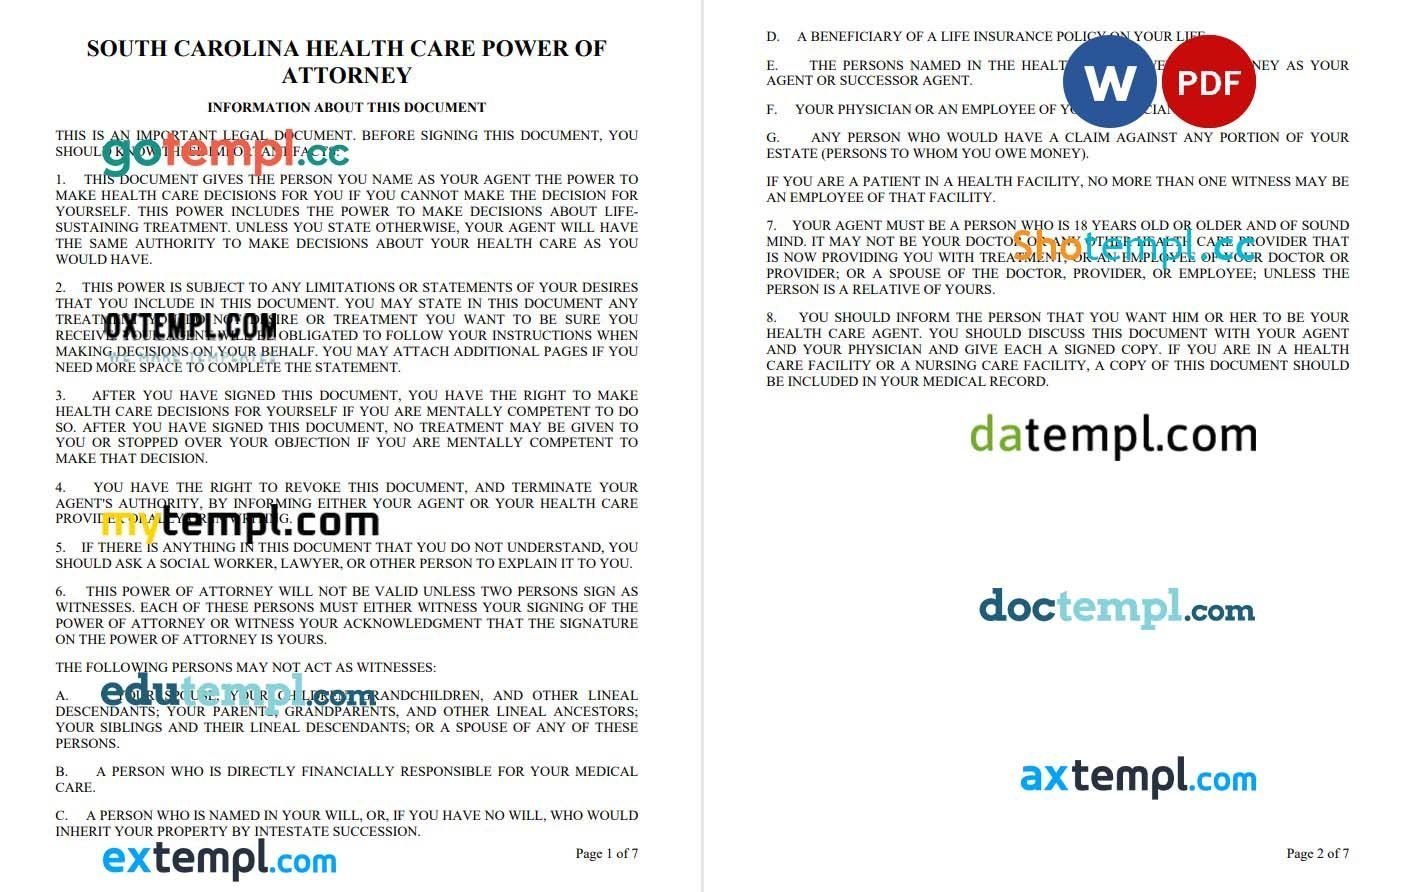 SC Health Care Power of Attorney example, fully editable